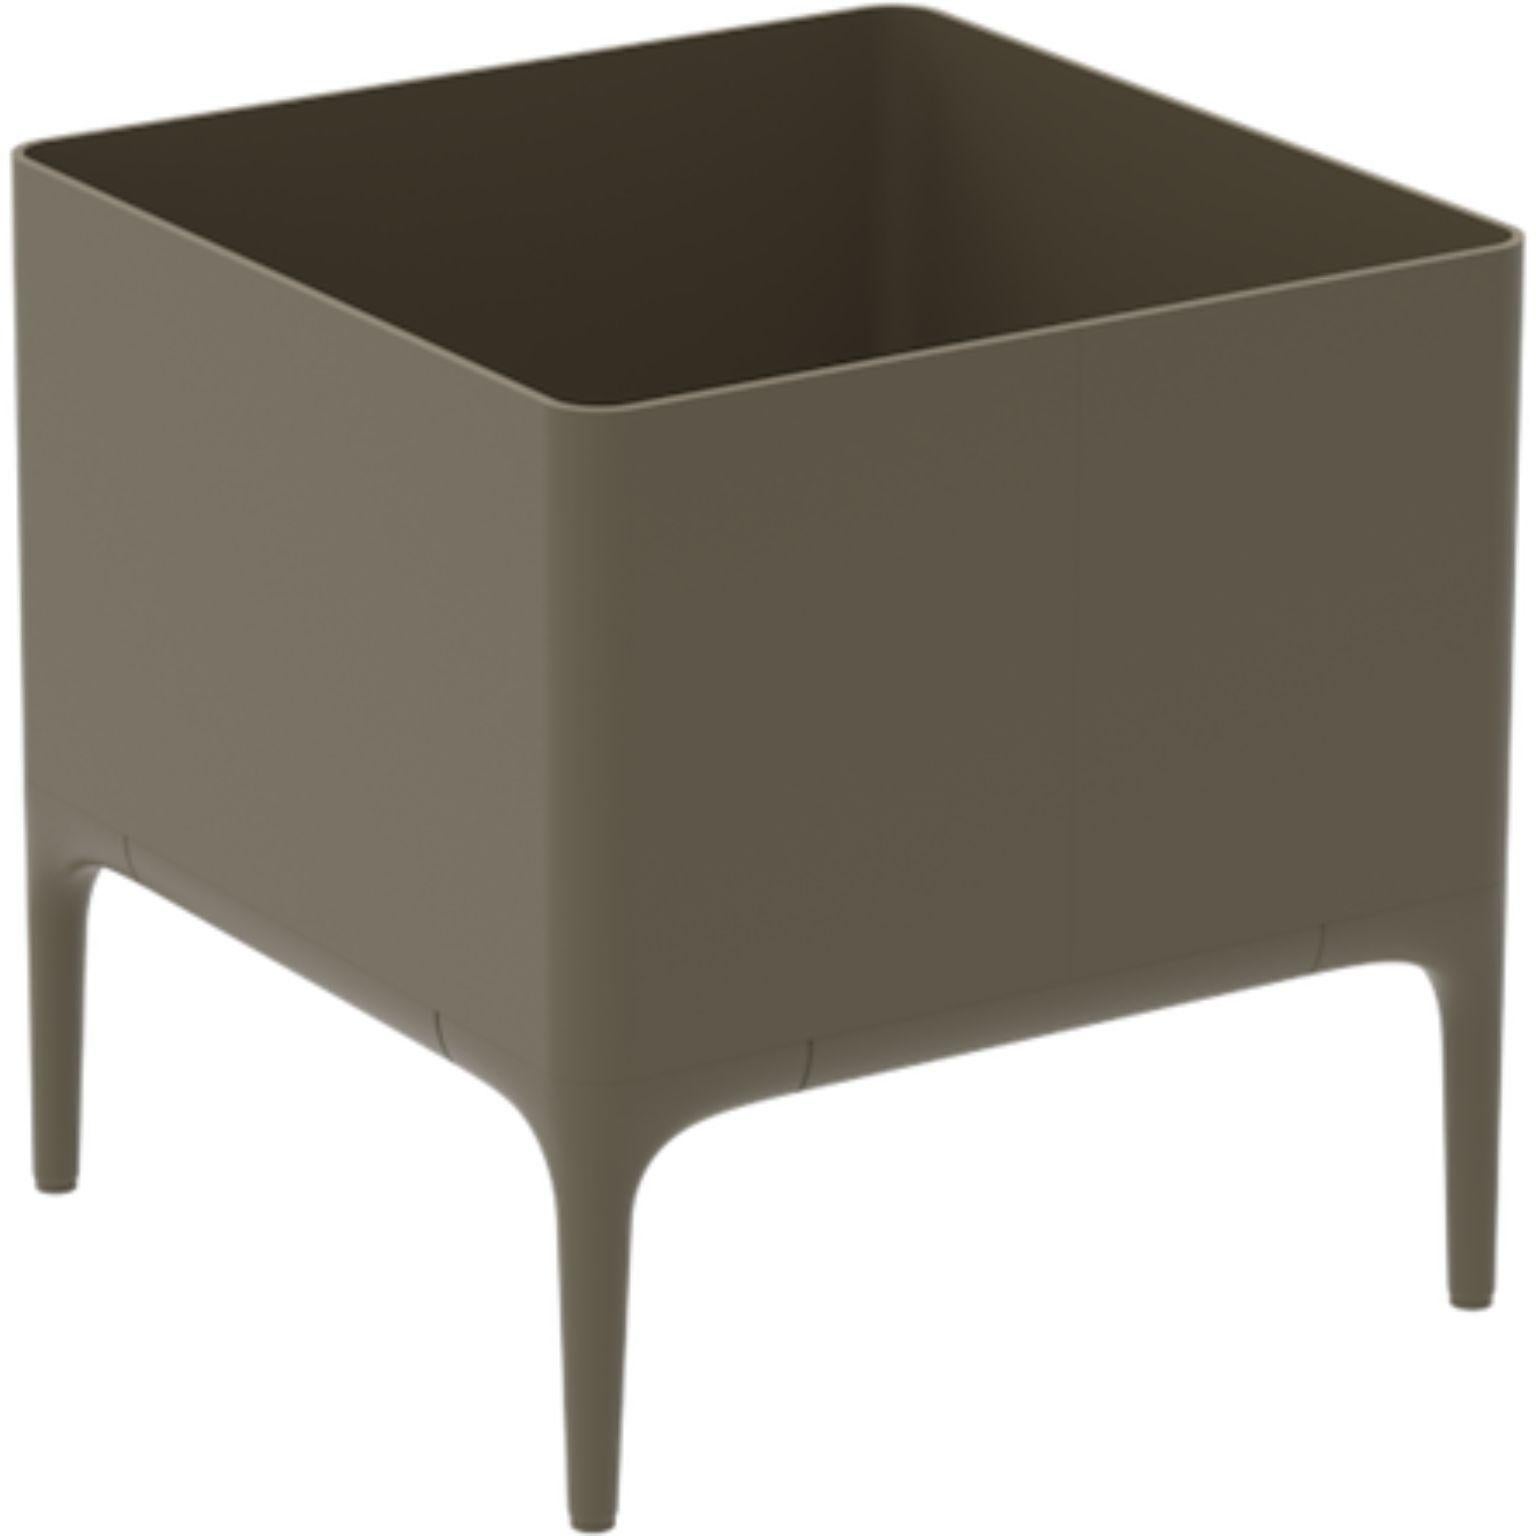 Xaloc Bronze 45 pot by MOWEE
Dimensions: D45 x W45 x H45 cm
Material: Aluminum
Weight: 8 kg
Also Available in different colors and finishes. 

 Xaloc synthesizes the lines of interior furniture to extrapolate to the exterior, creating an